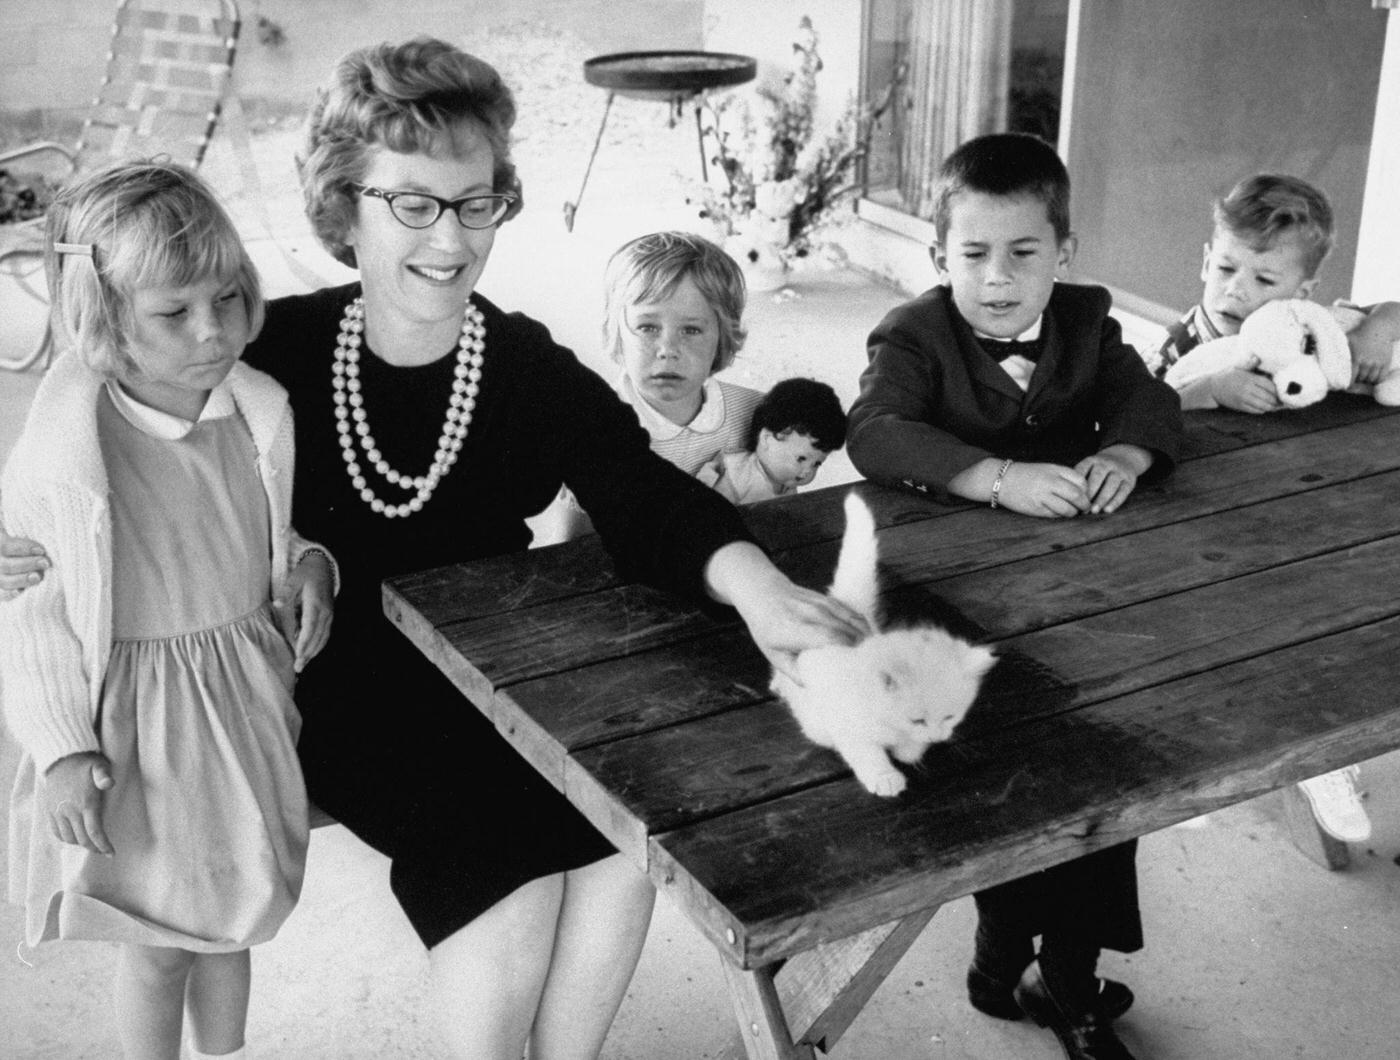 Mrs. James Webb, wife of a passenger on a Continental Airlines jet that crashed over Unionville, sitting with her children.